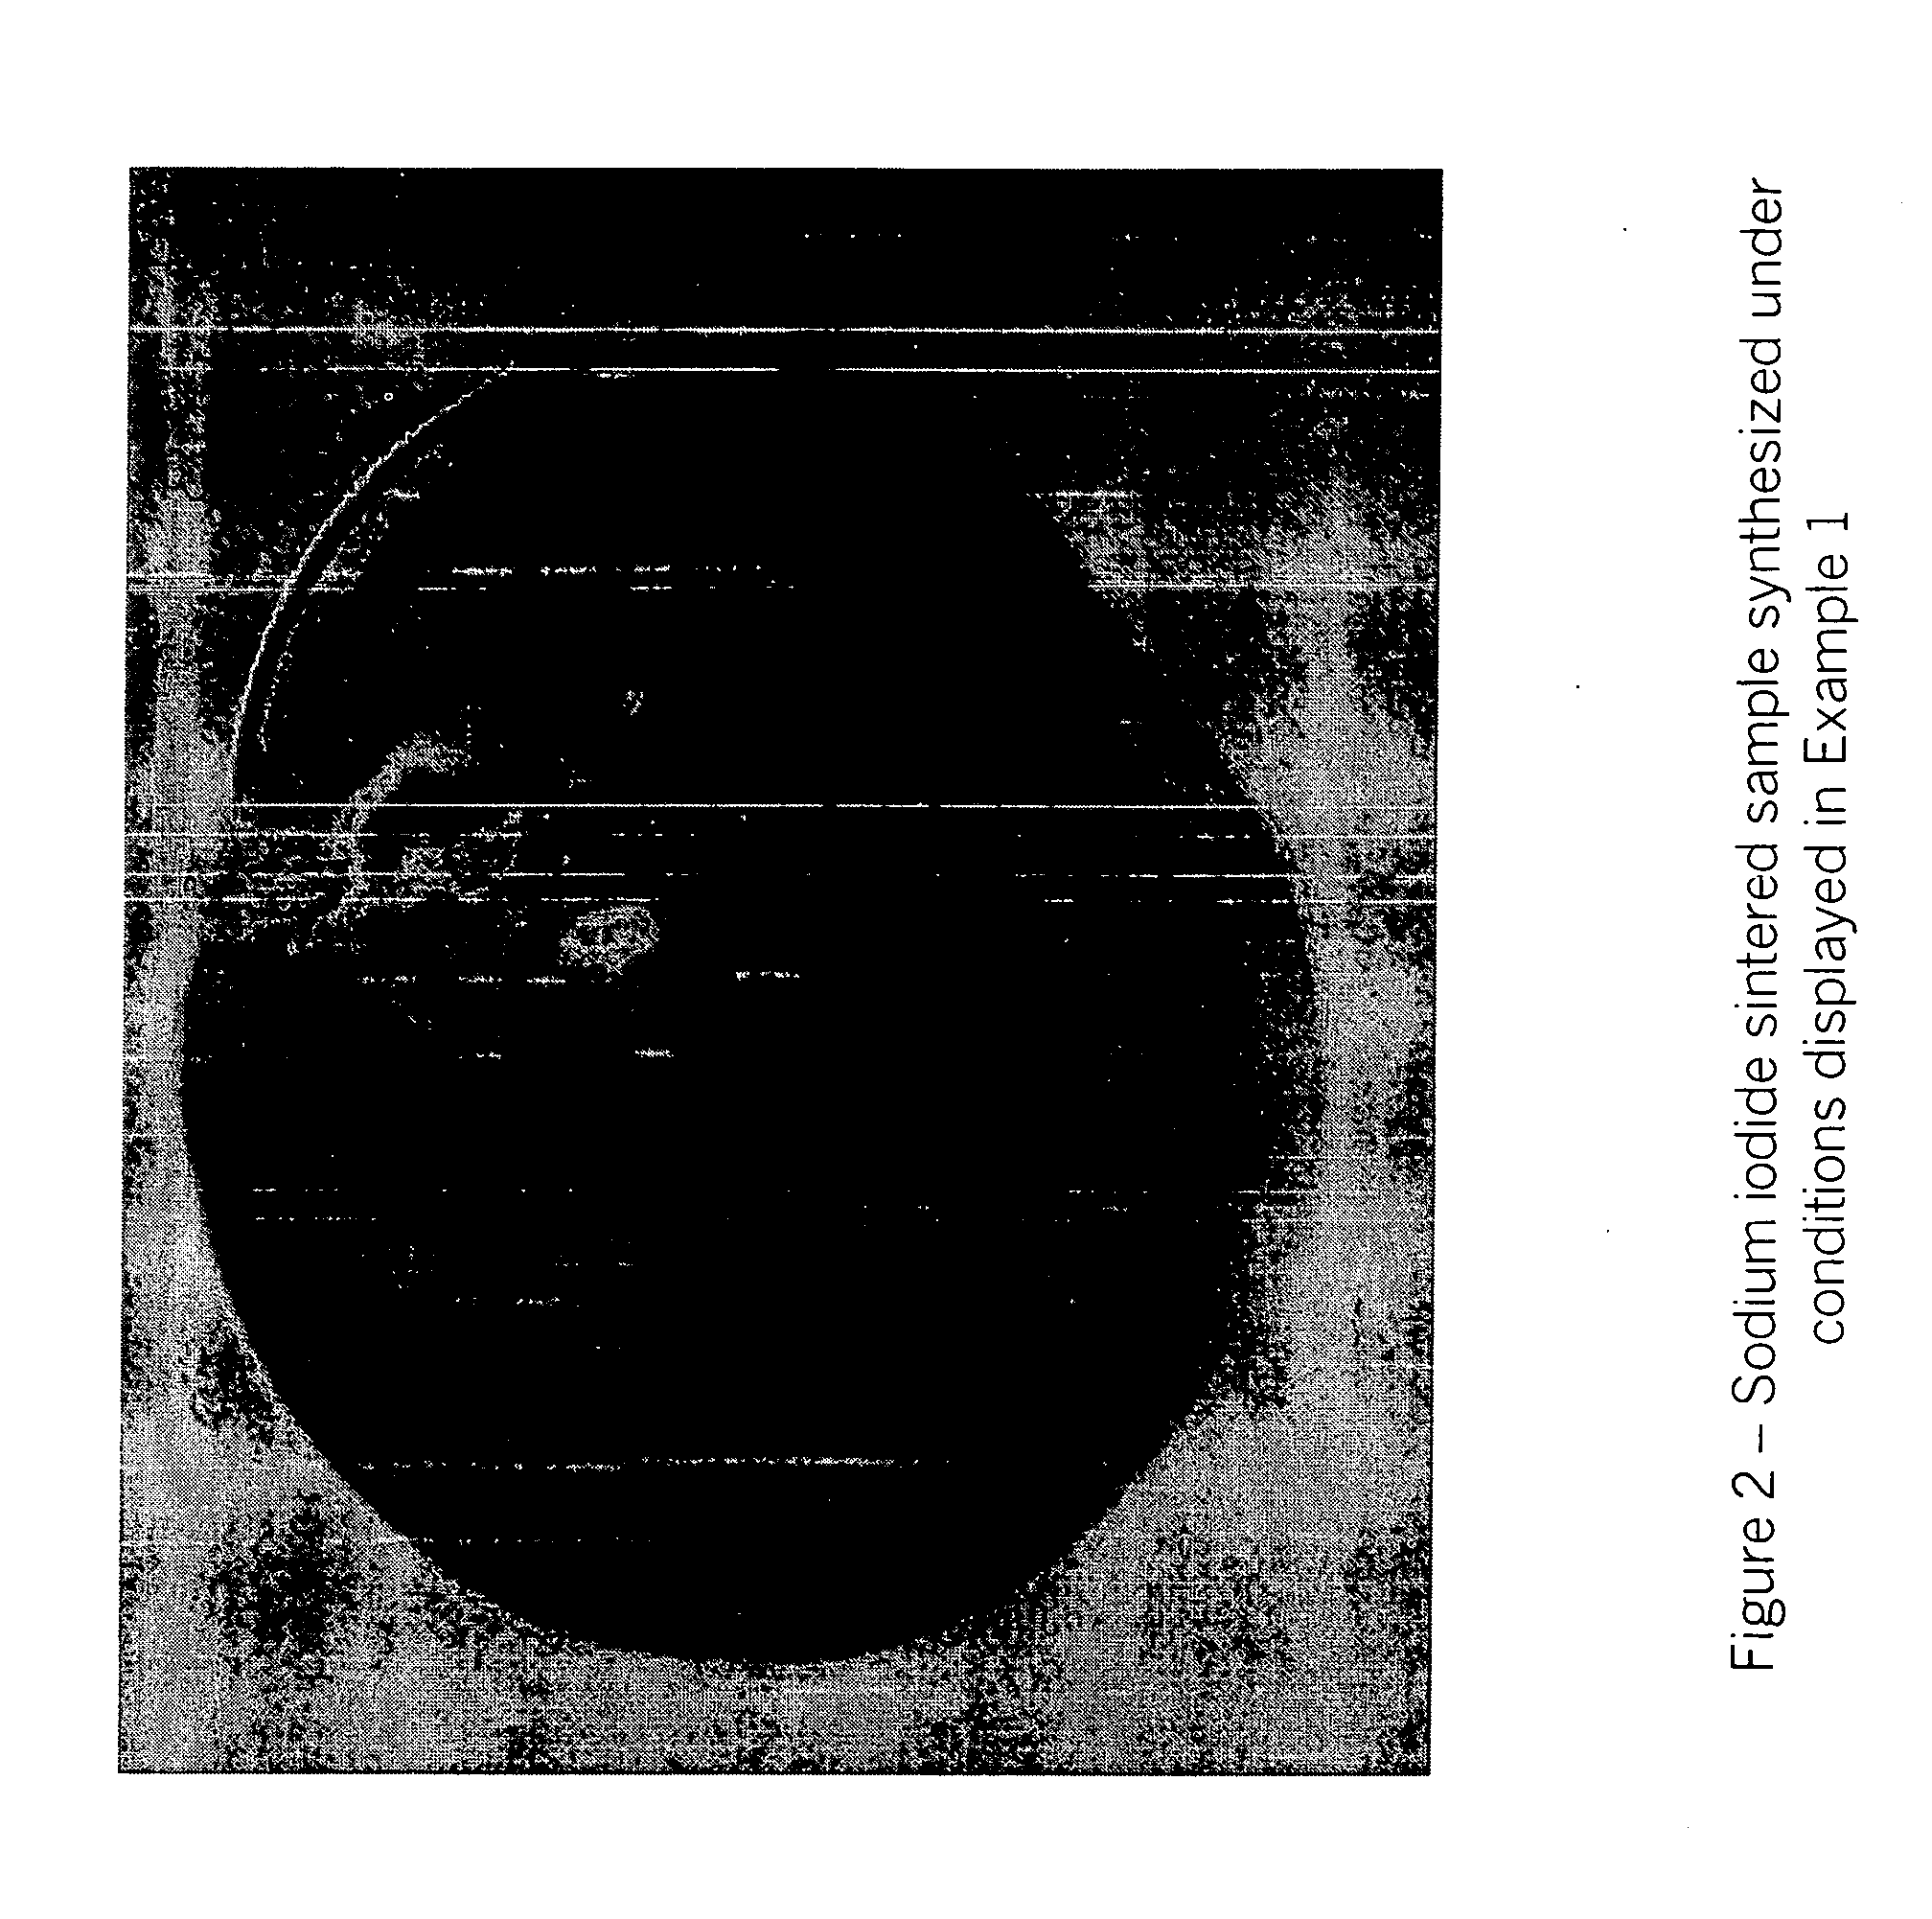 Sintered cubic halide scintillator material, and method for making same